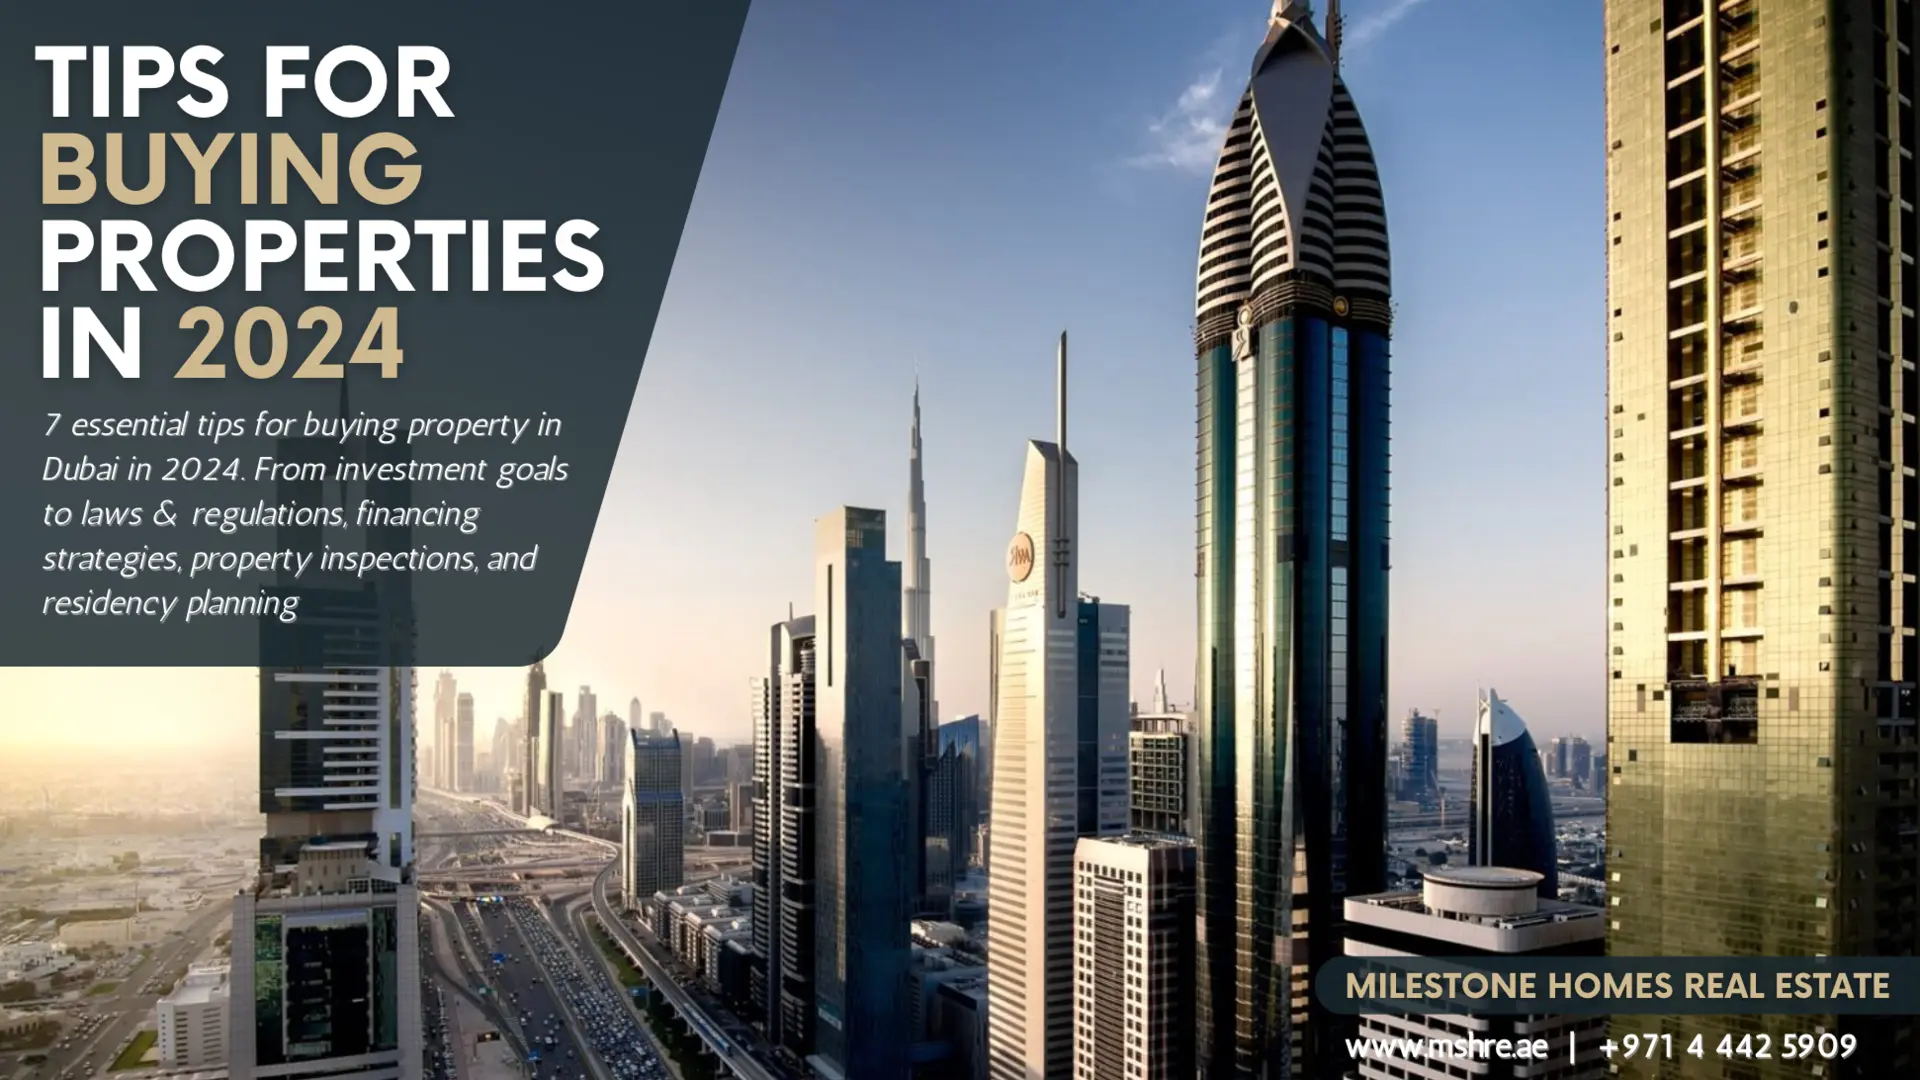 Tips for Buying Property in Dubai in 2024